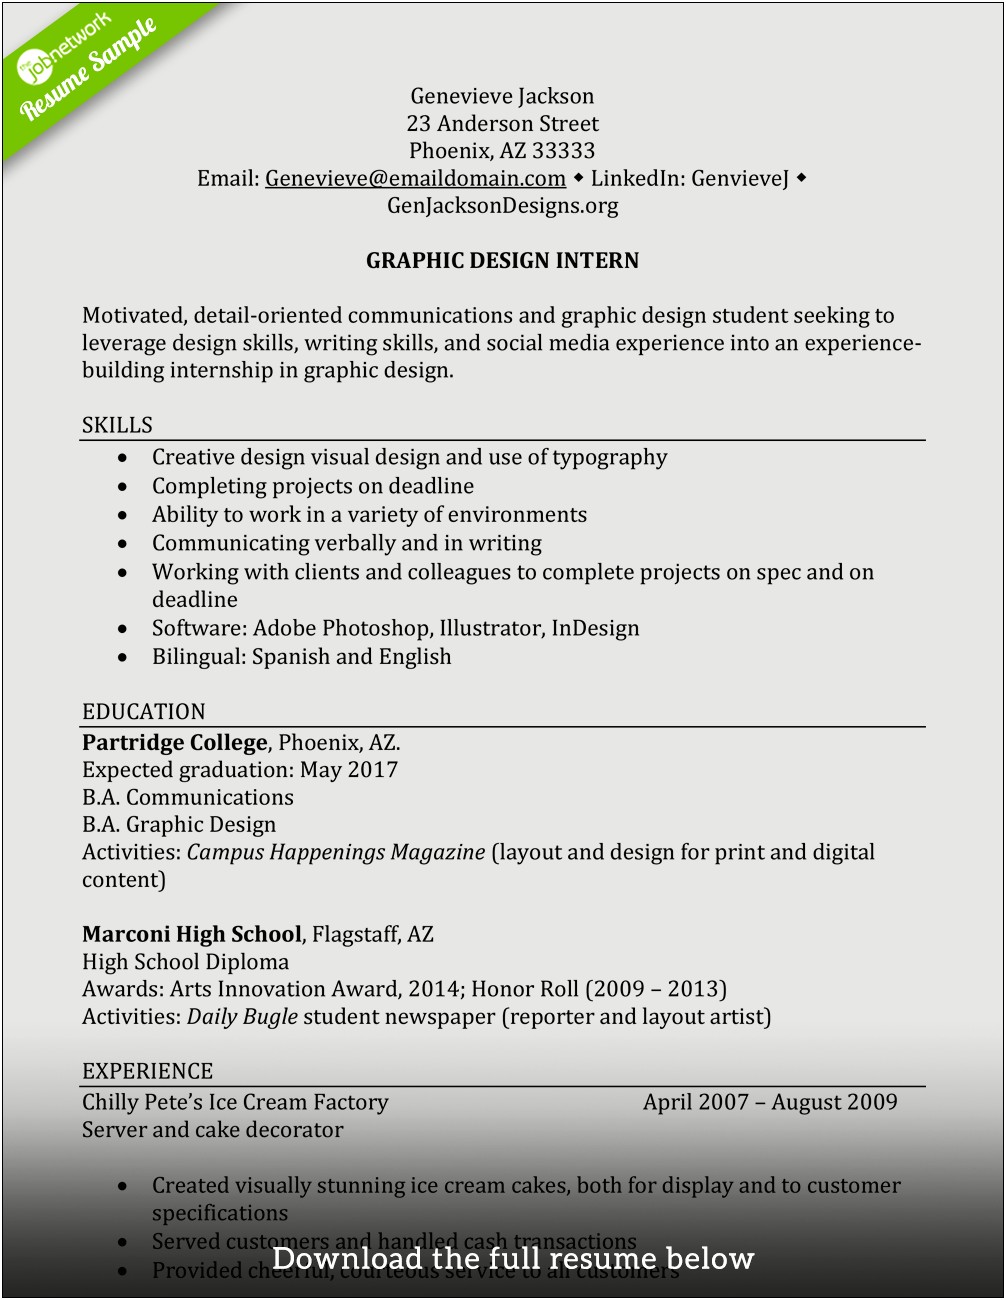 College Resume Summary For High School Students